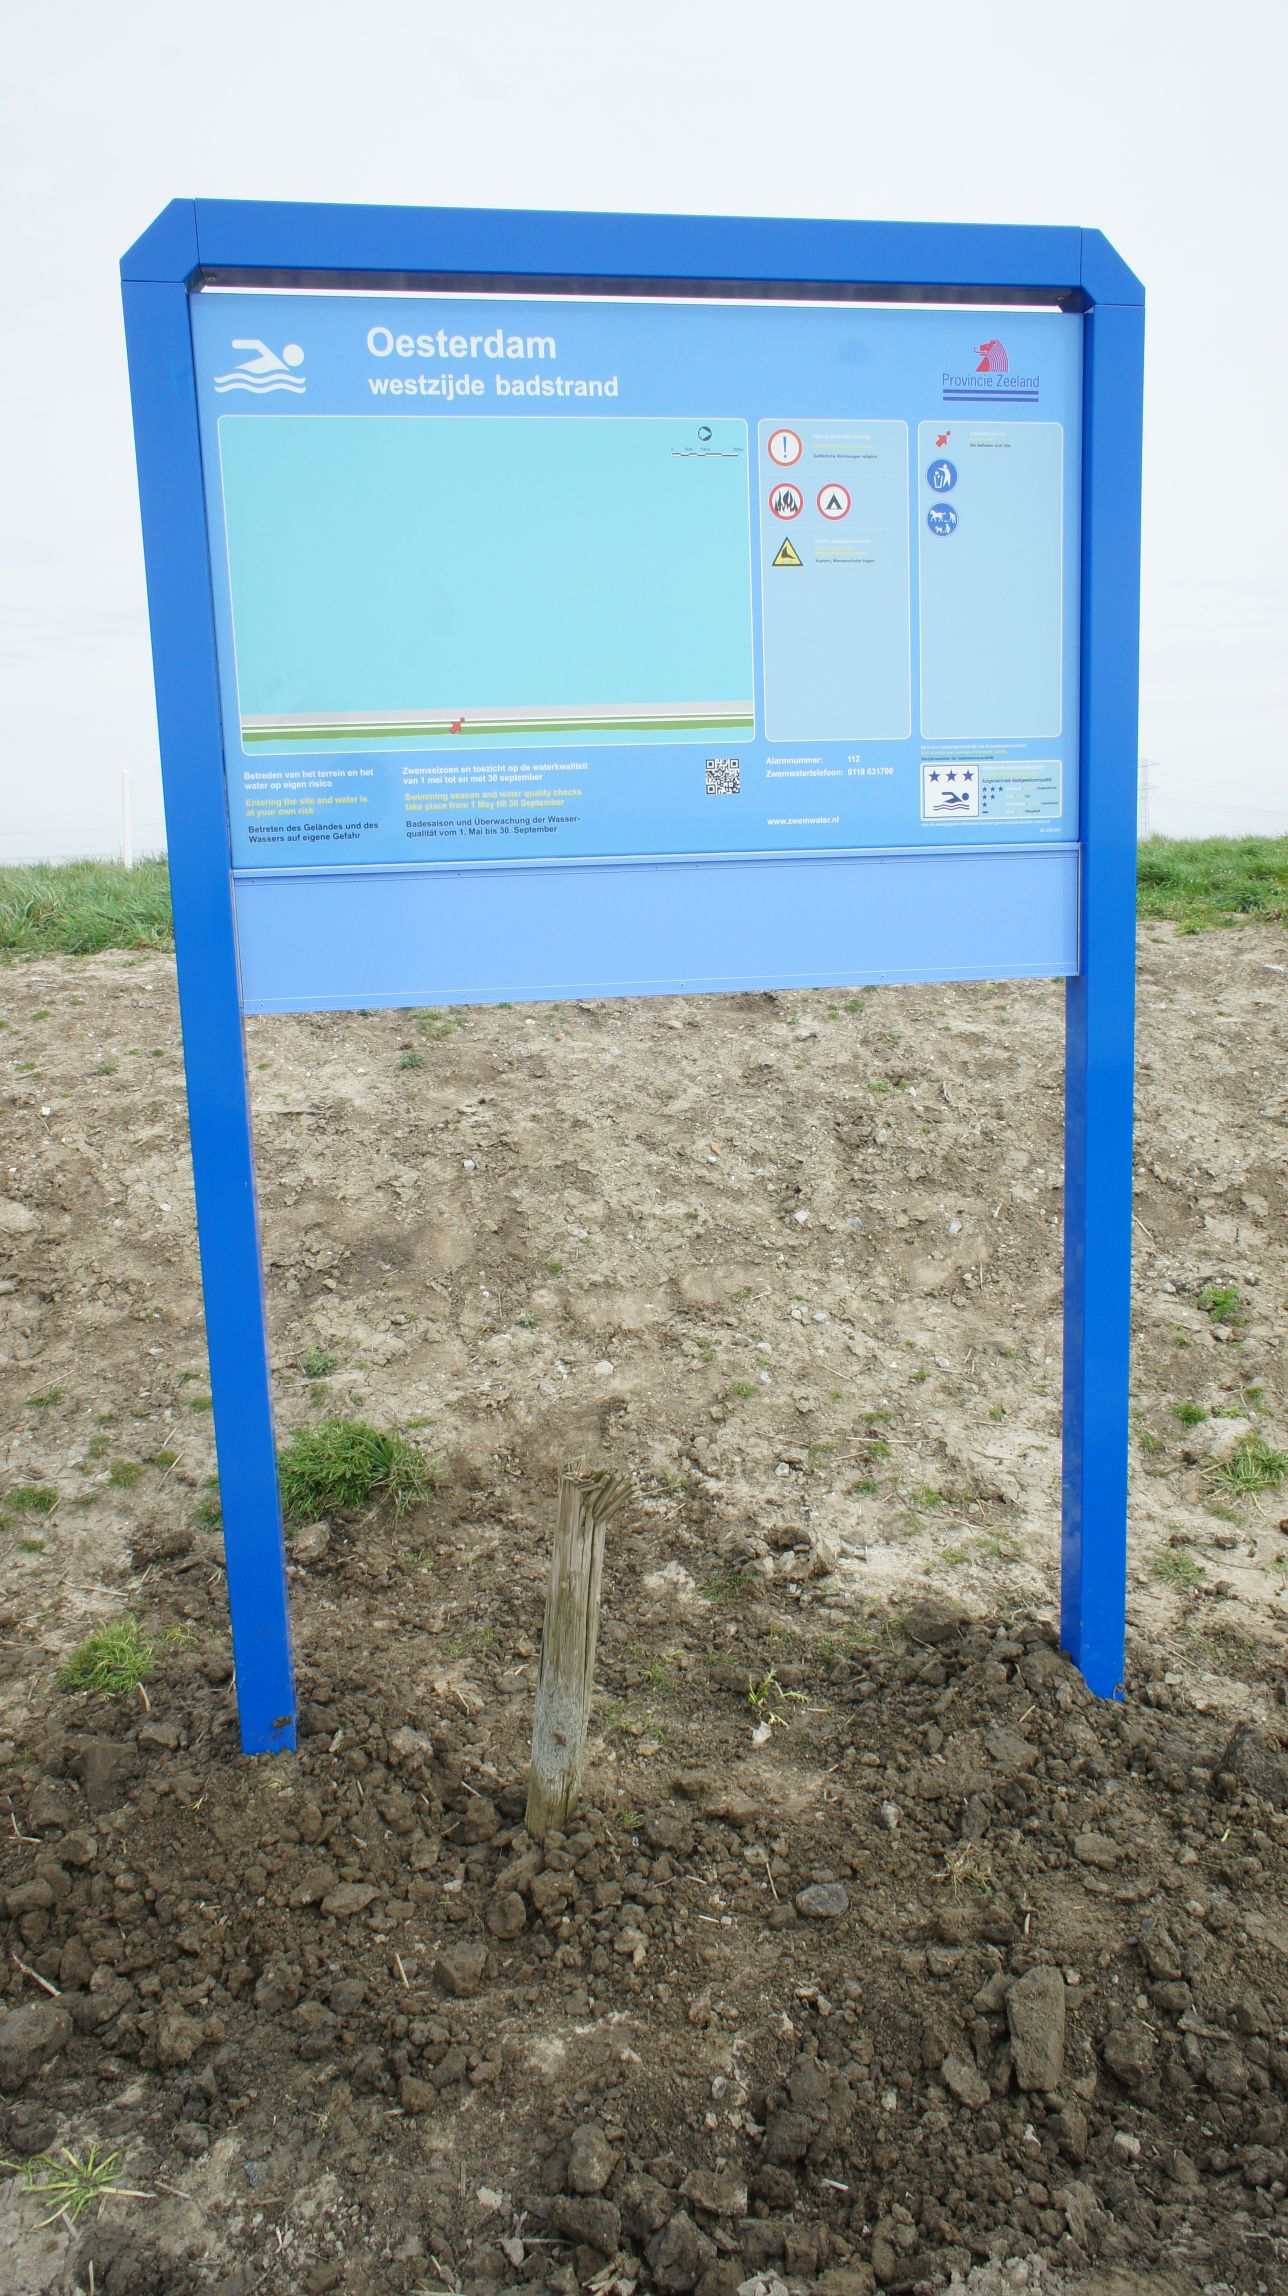 The information board at the swimming location Oesterdam Westzijde Badstrand